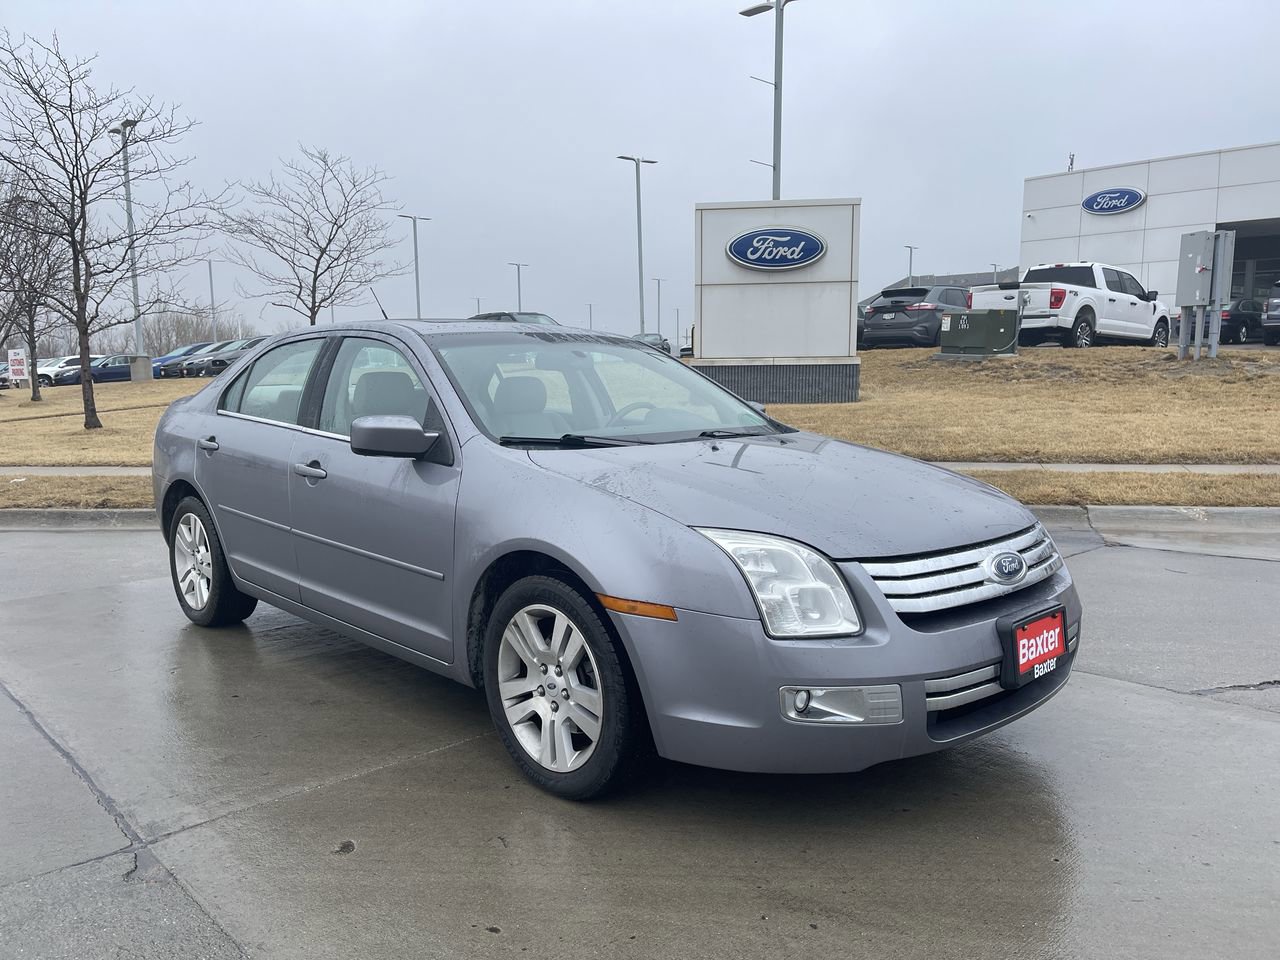 Certified Pre-Owned 2007 Ford Fusion SEL 4dr Car in Omaha #FC01081A |  Baxter Auto Group